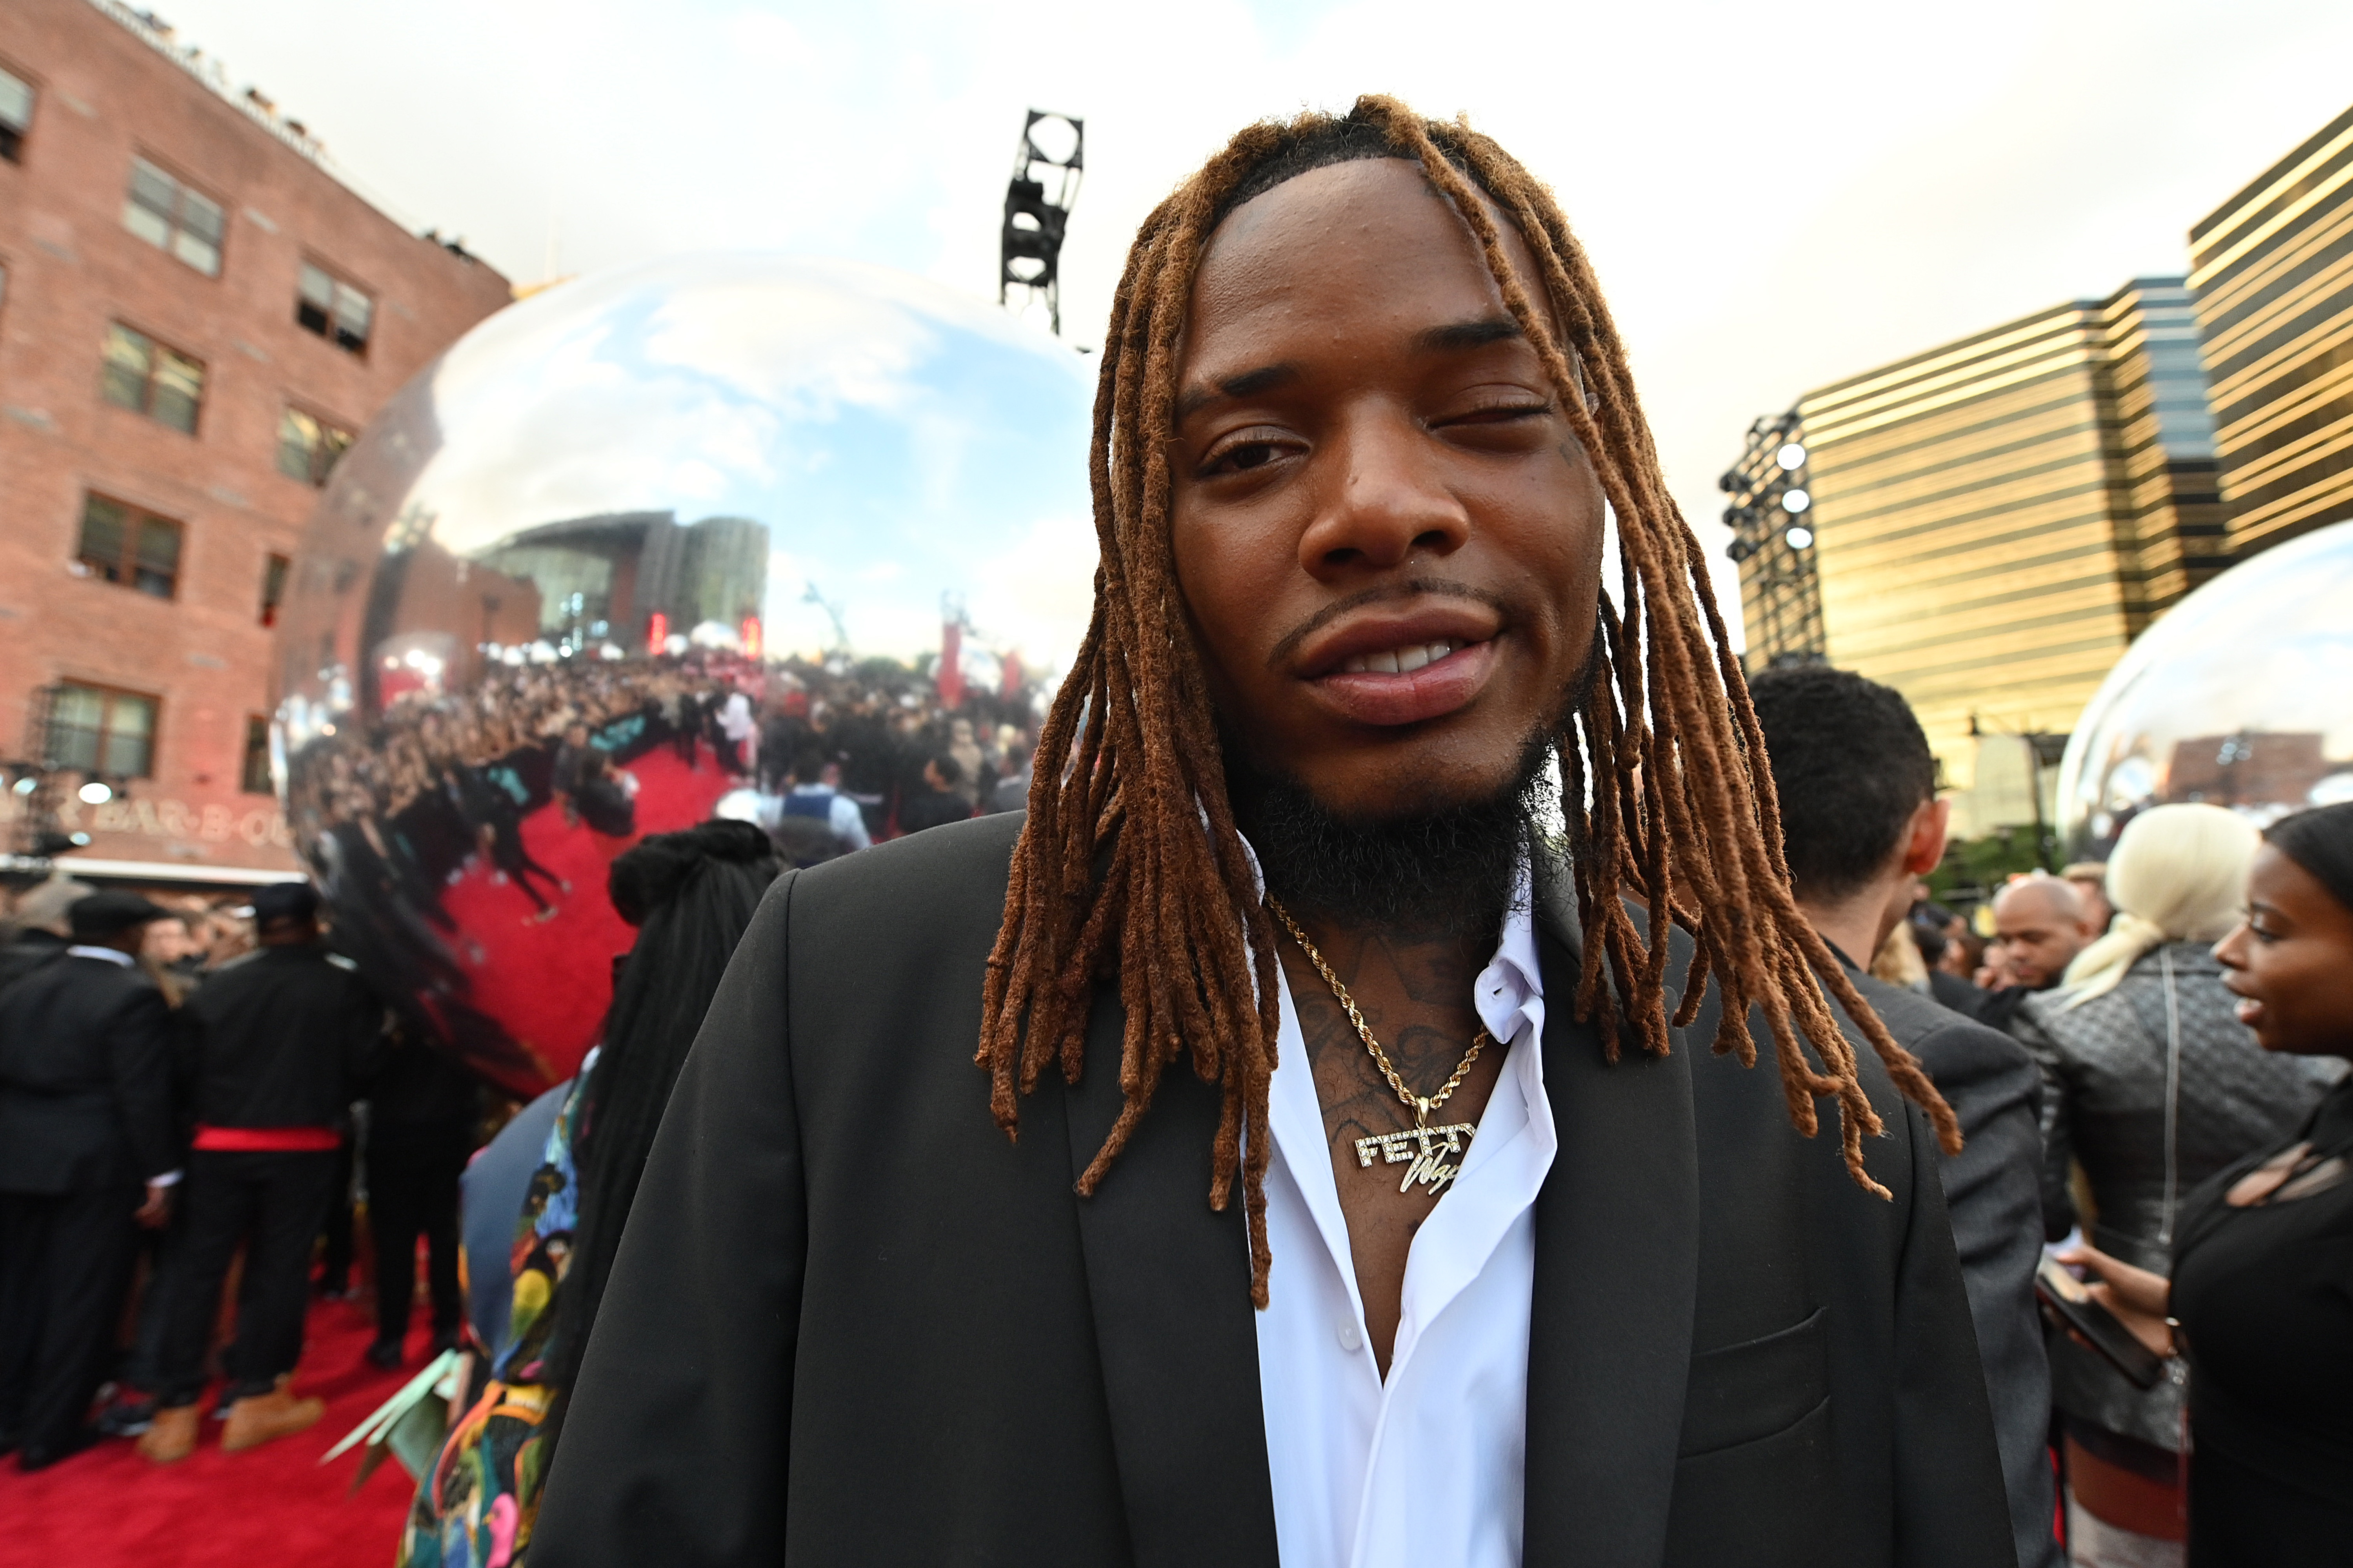 Fetty Wap Pleads Guilty To Drug Charges: Report